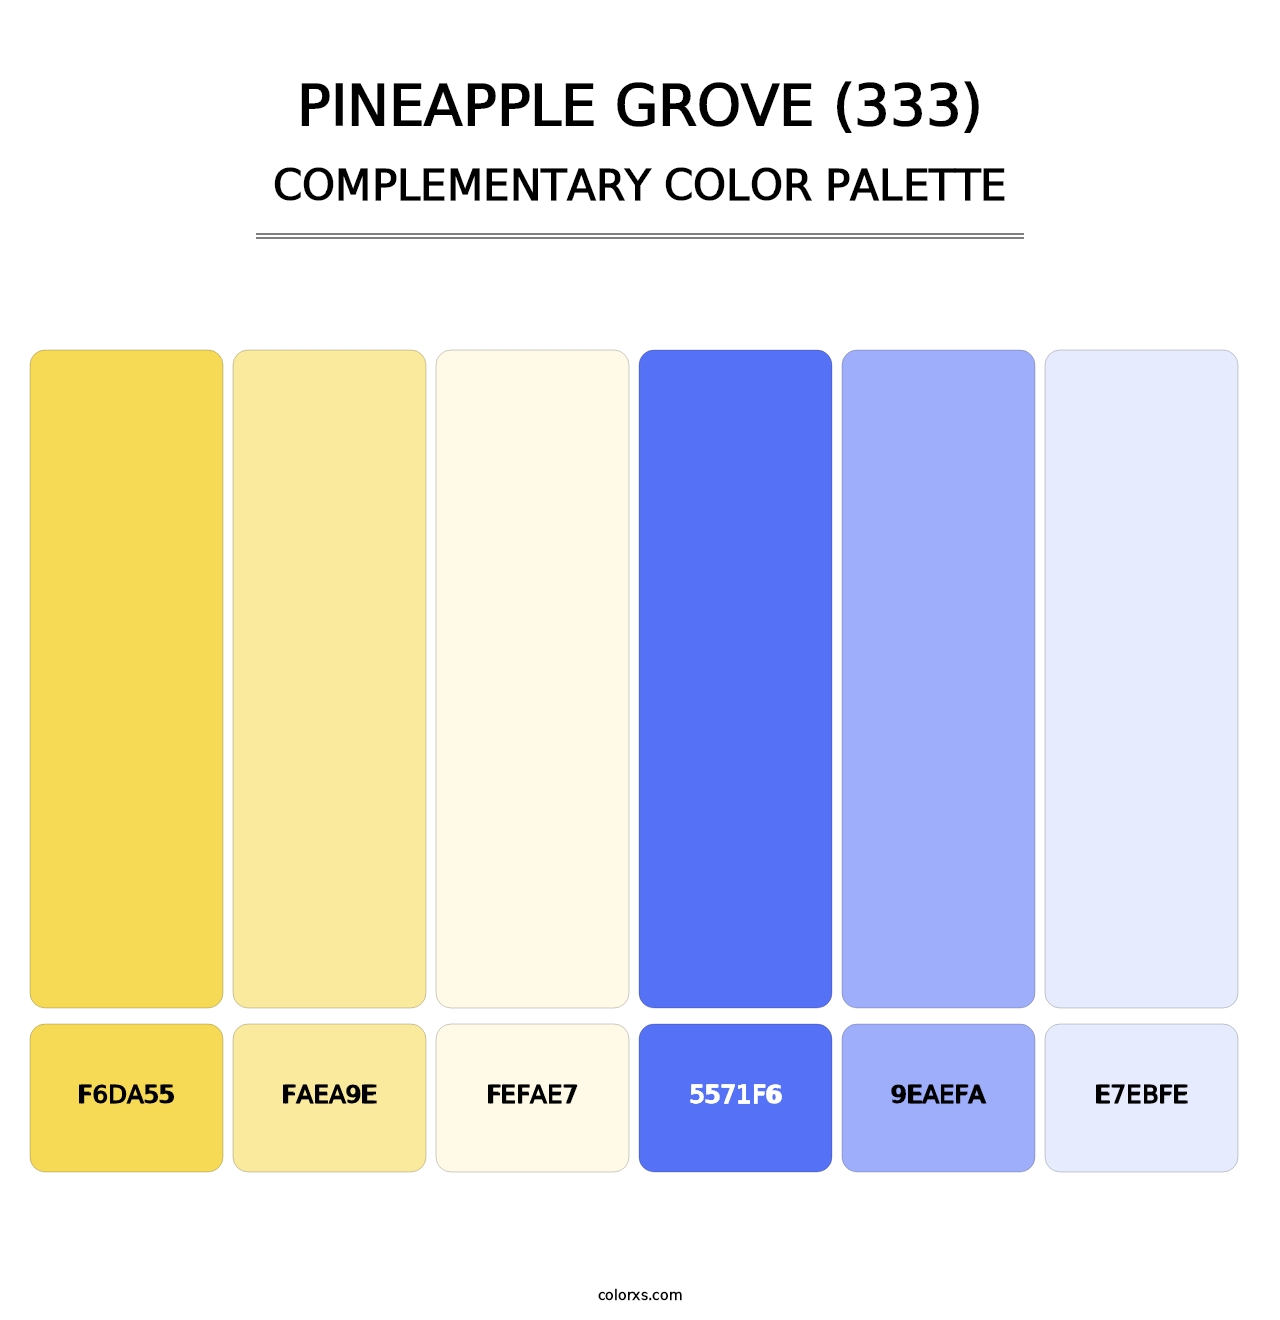 Pineapple Grove (333) - Complementary Color Palette